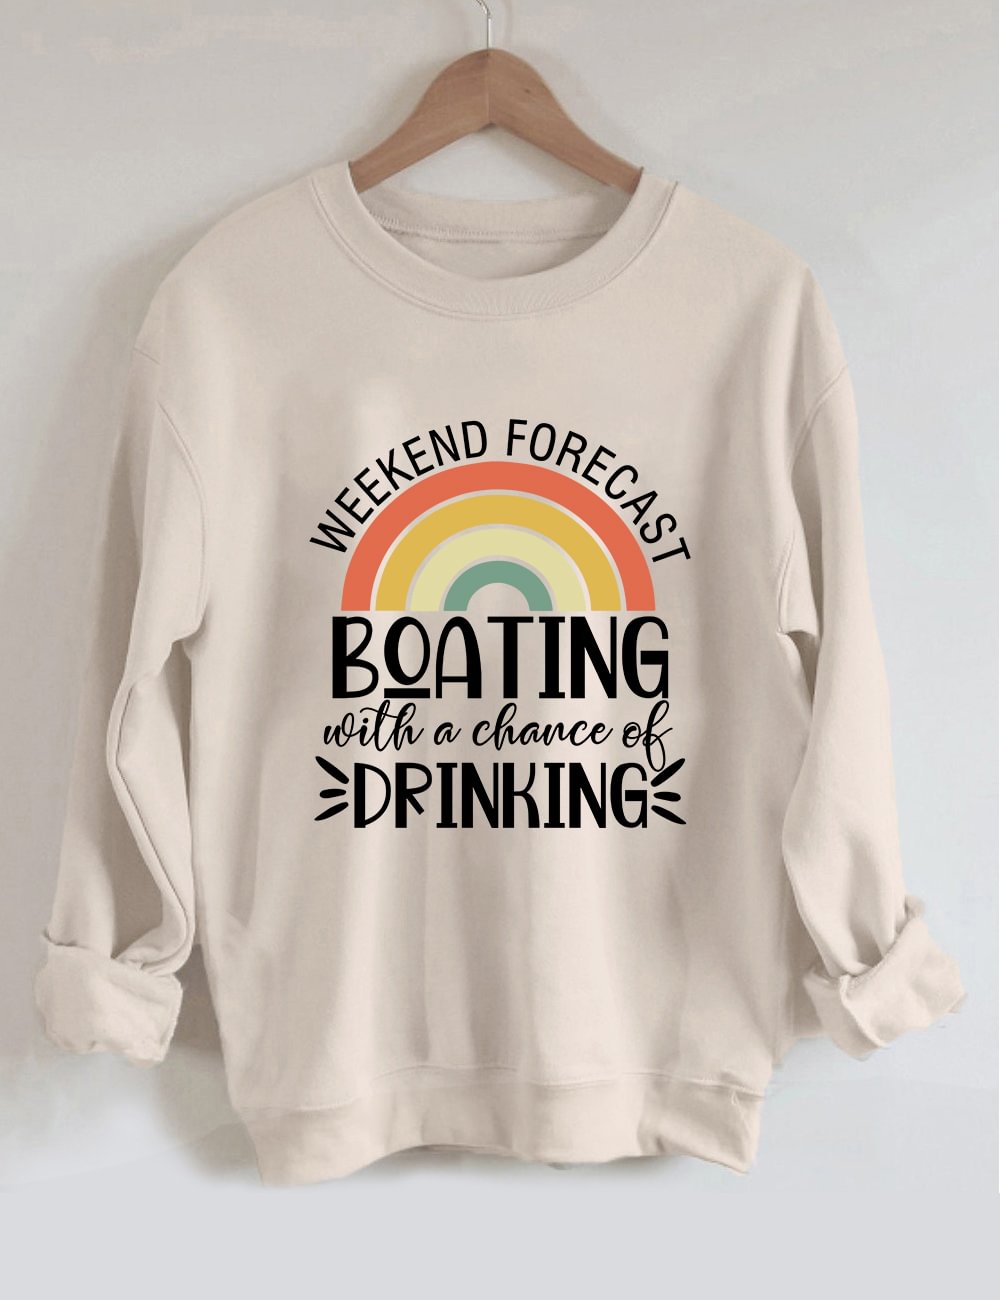 Weekend Forecast Boating With A Chance Of Drinking Sweatshirt